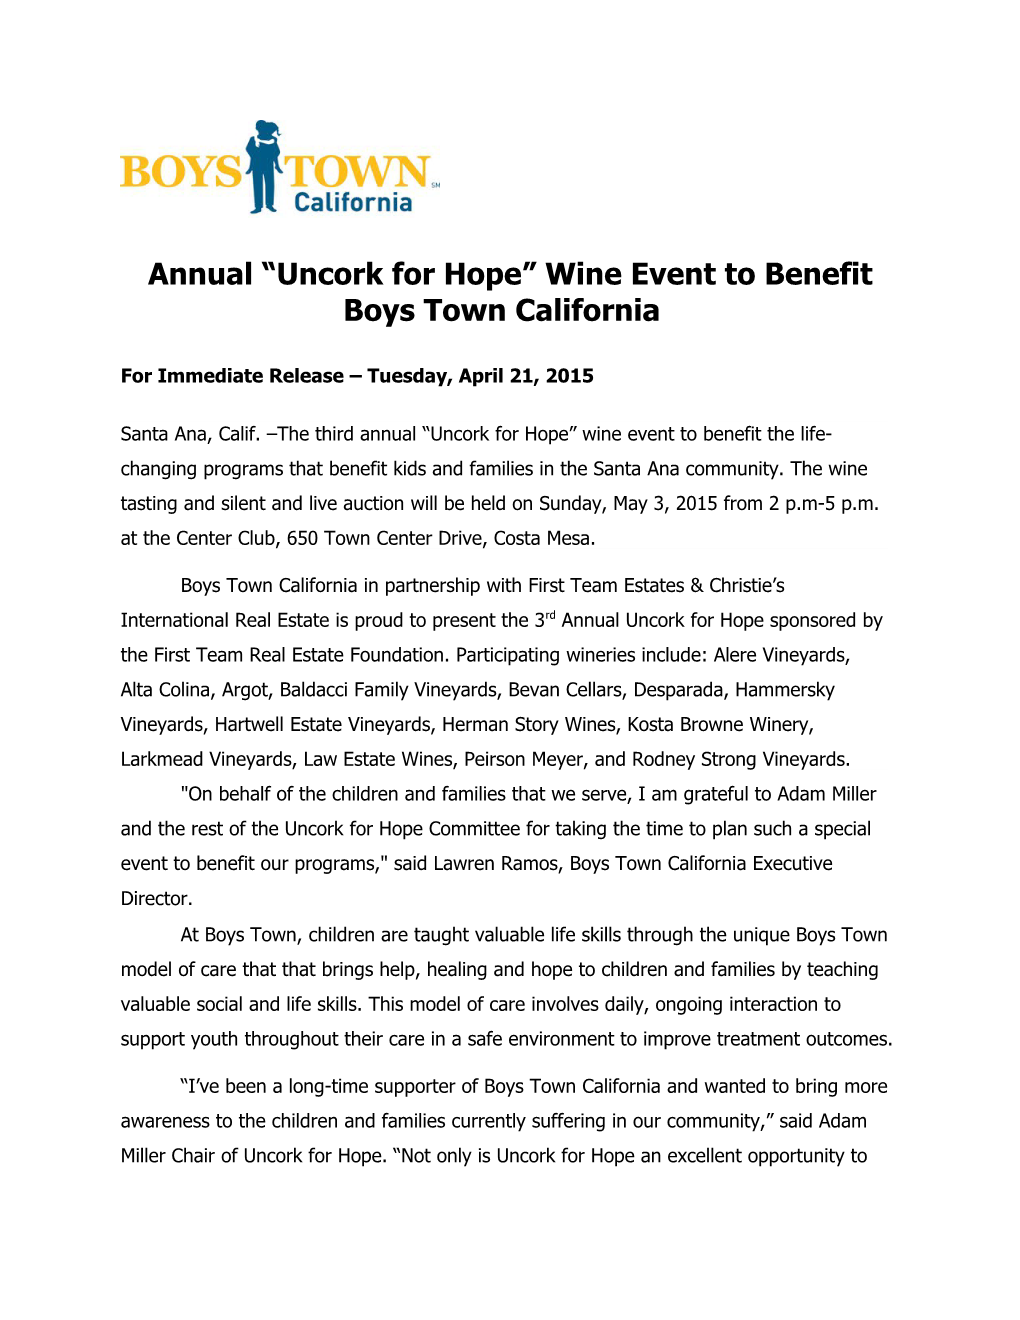 Annual Uncork for Hope Wine Event to Benefit Boys Town California